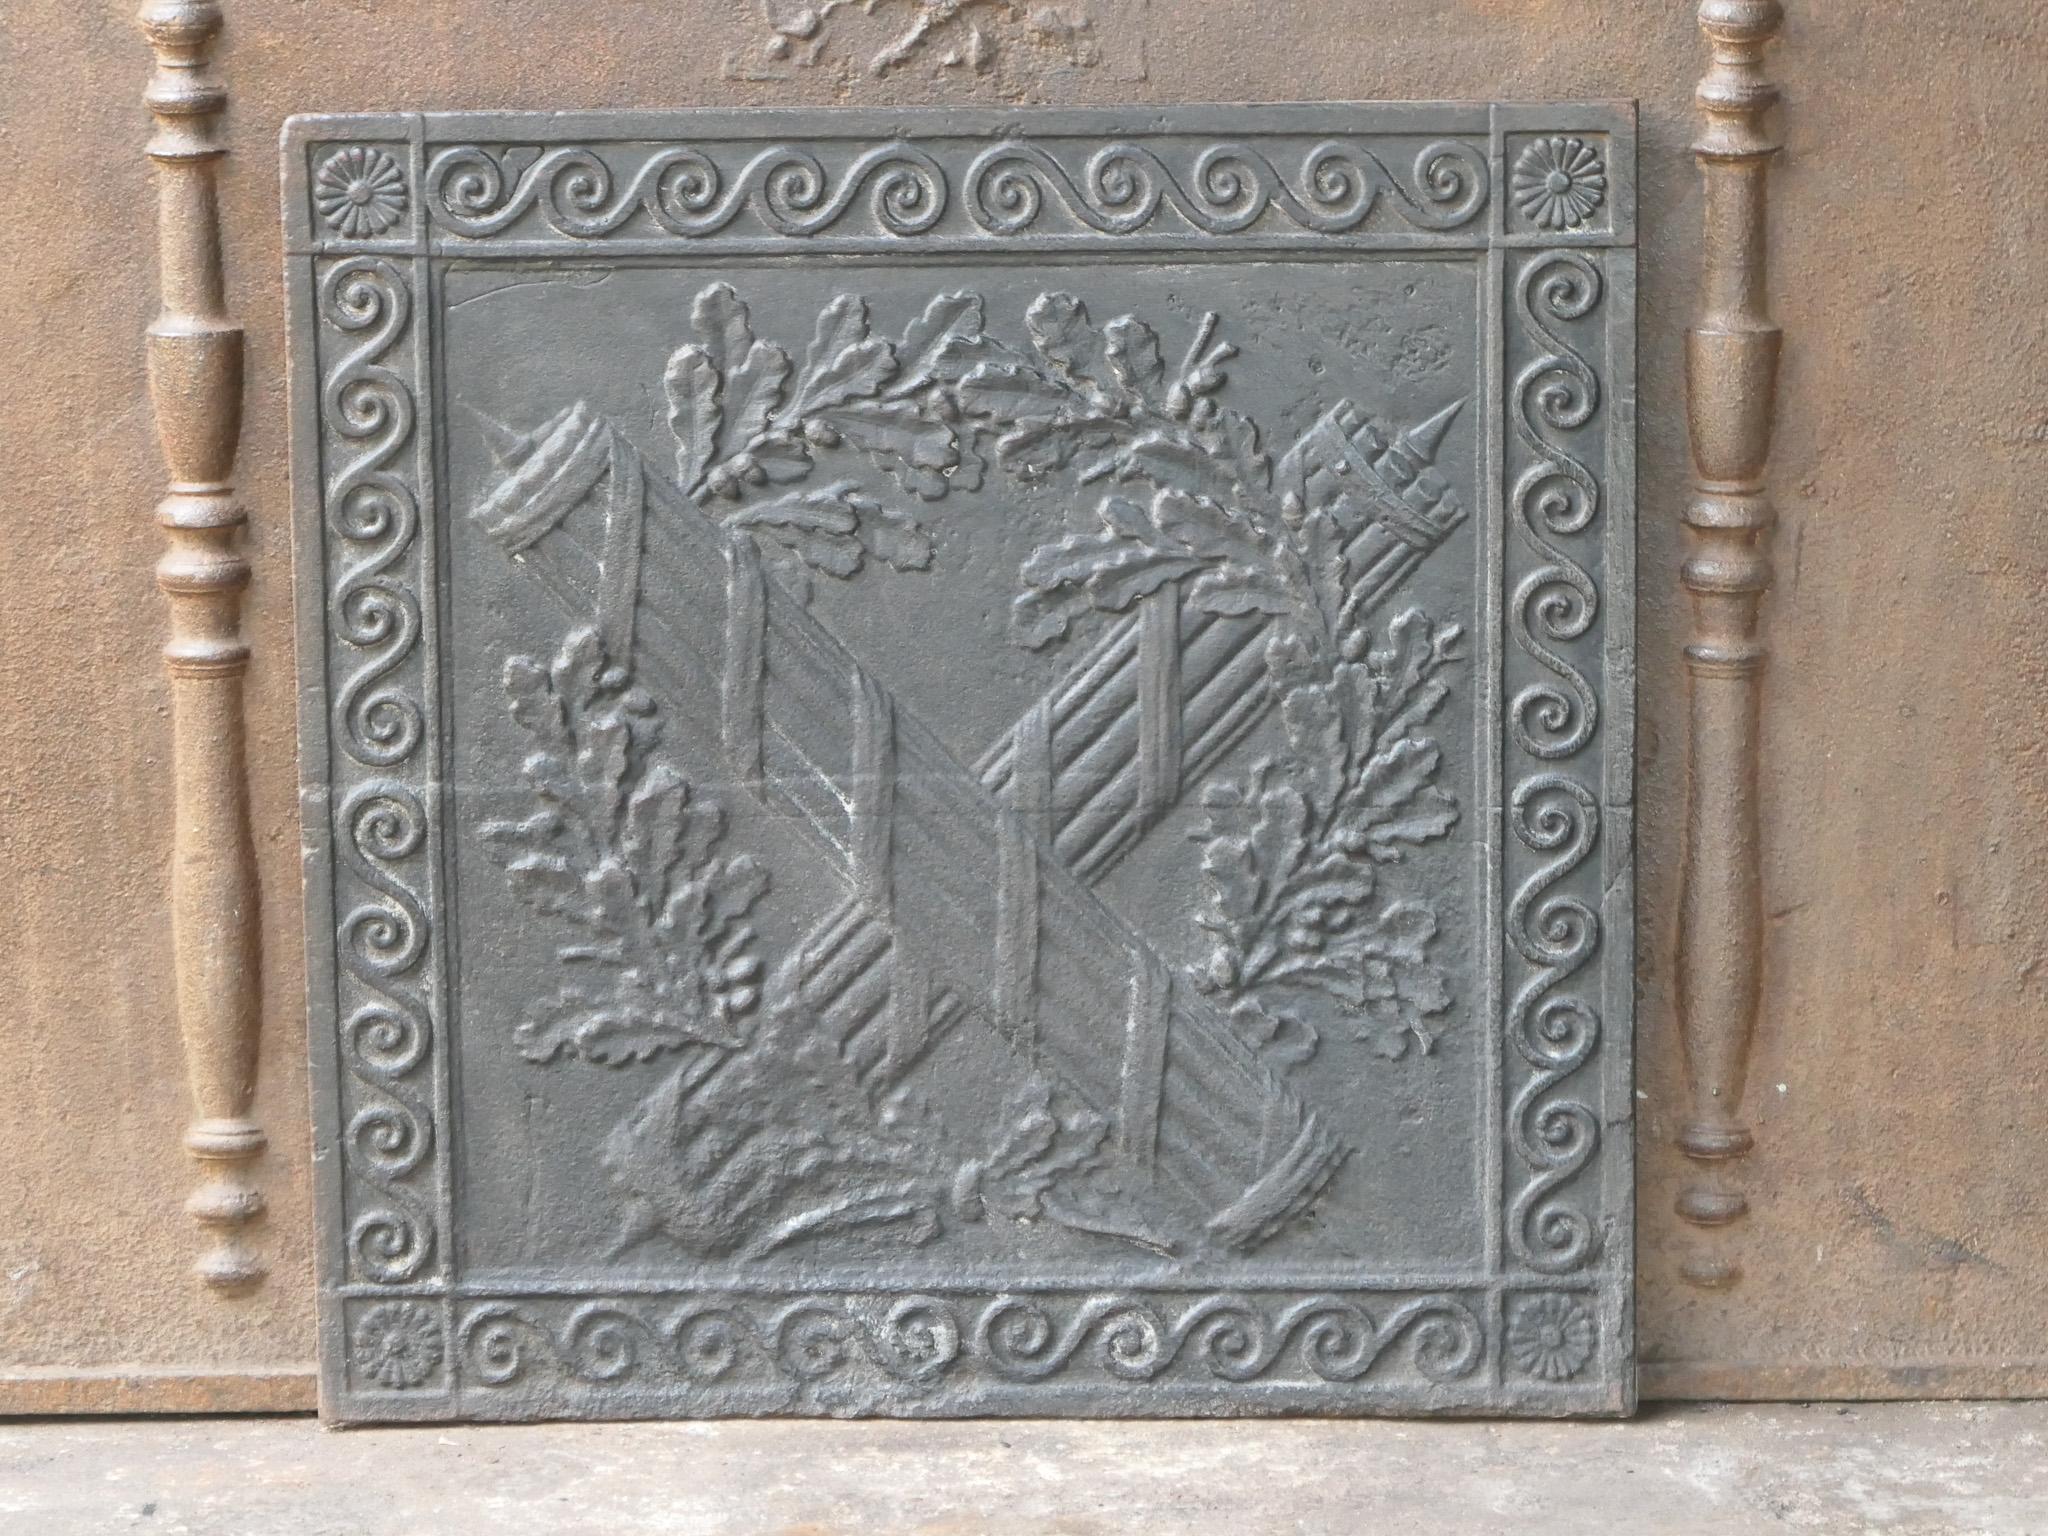 18th-19th century French neoclassical period fireback with fasces. Fasces are a bundle of rods tied around an axe, which was a symbol carried by lictors in ancient Rome to signify the authority and power of a magistrate. This symbol has been used